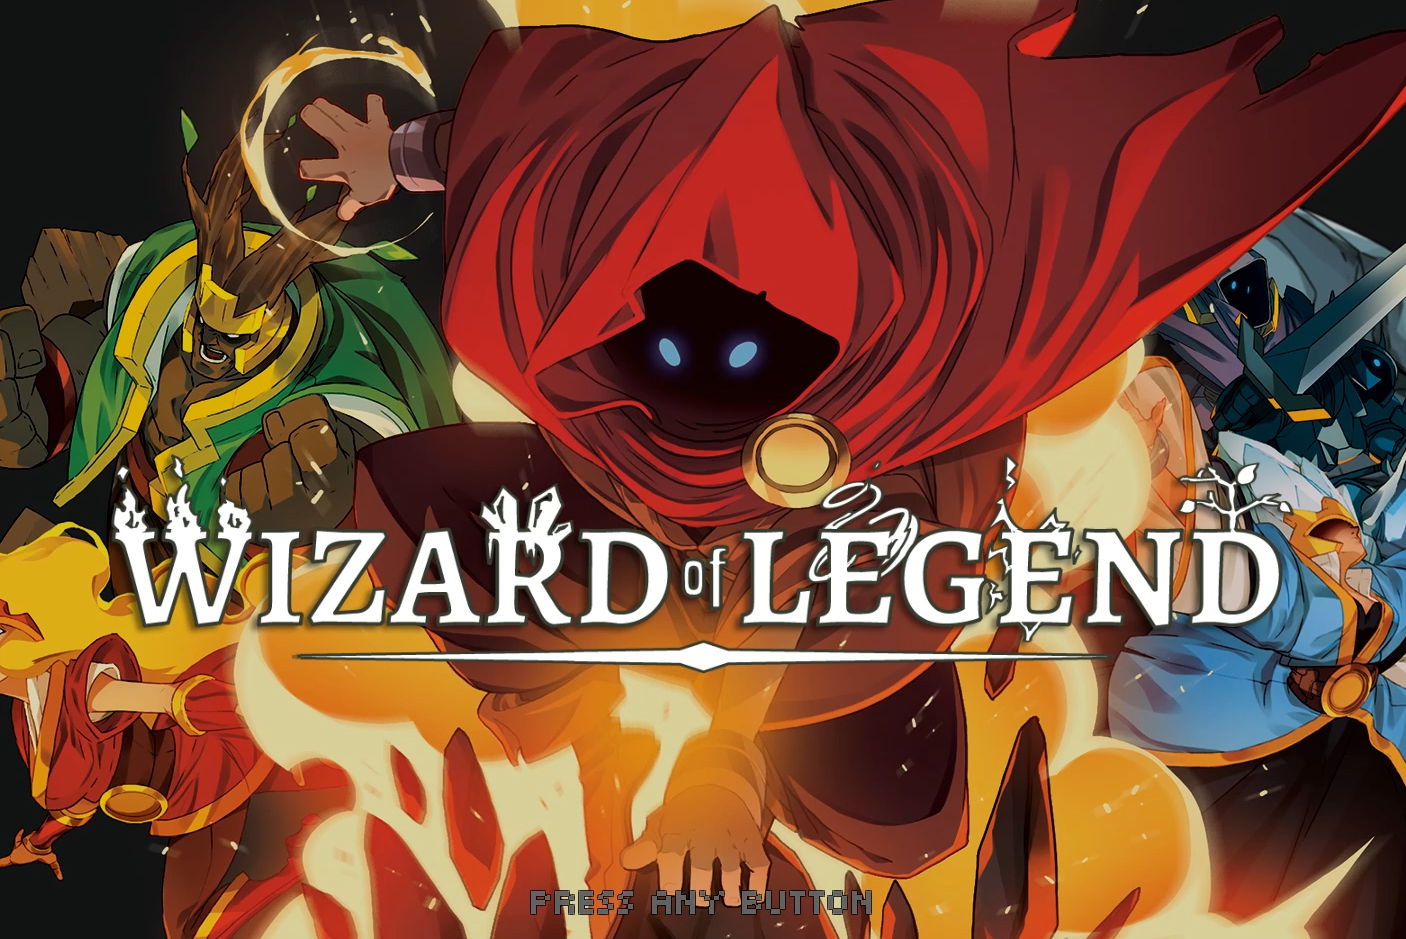 Wizard of Legend: Be quick or be dead